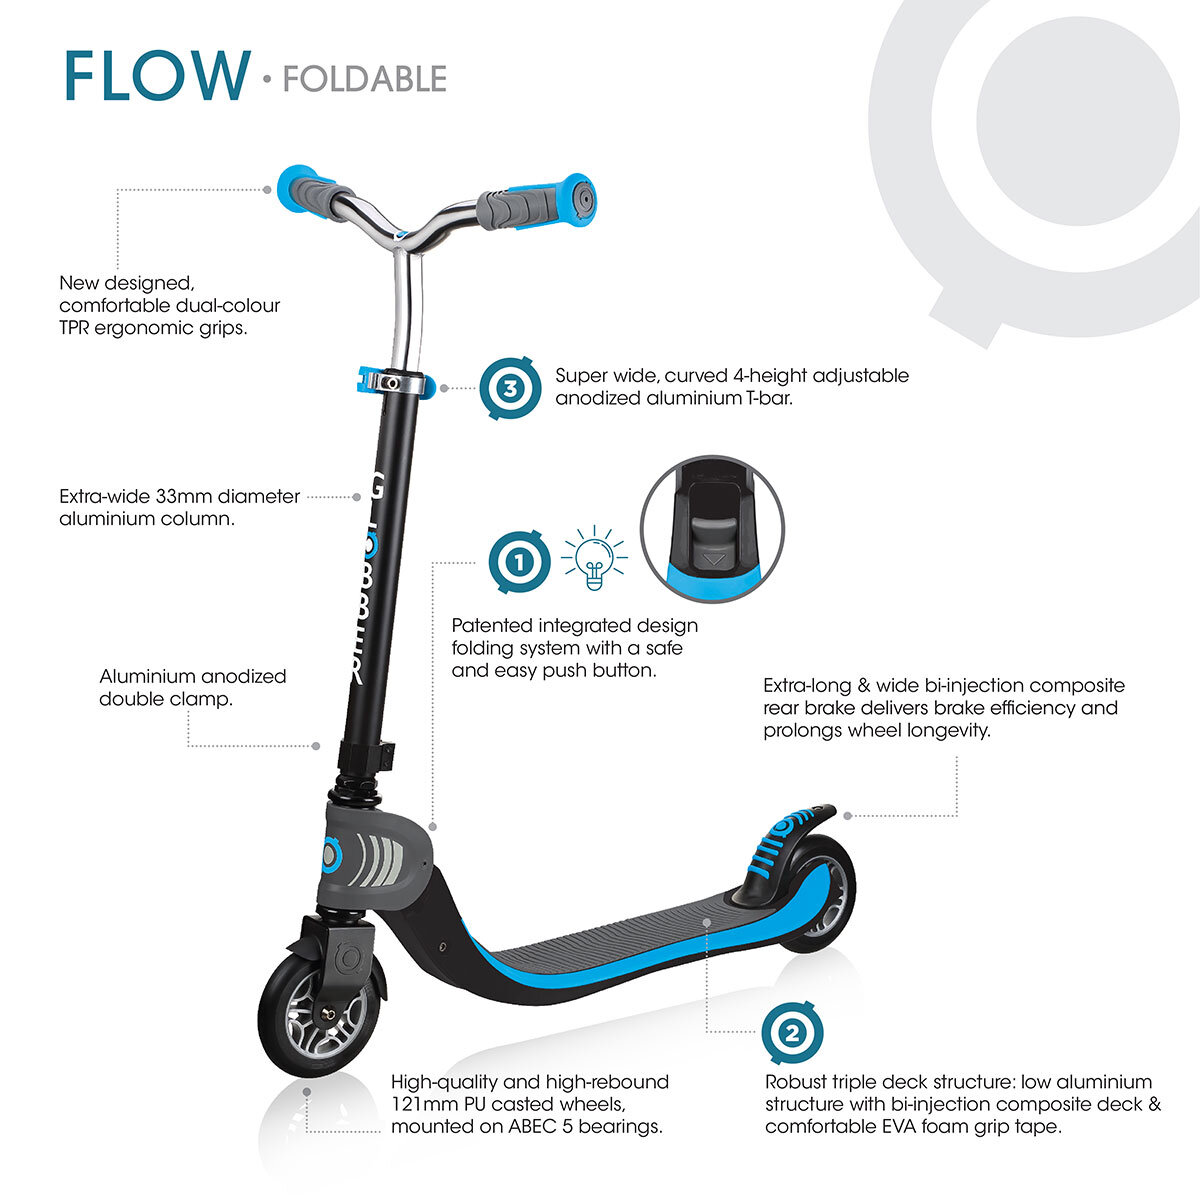 Buy Globber Flow Foldable 125 Scooter KSP Image at Costco.co.uk